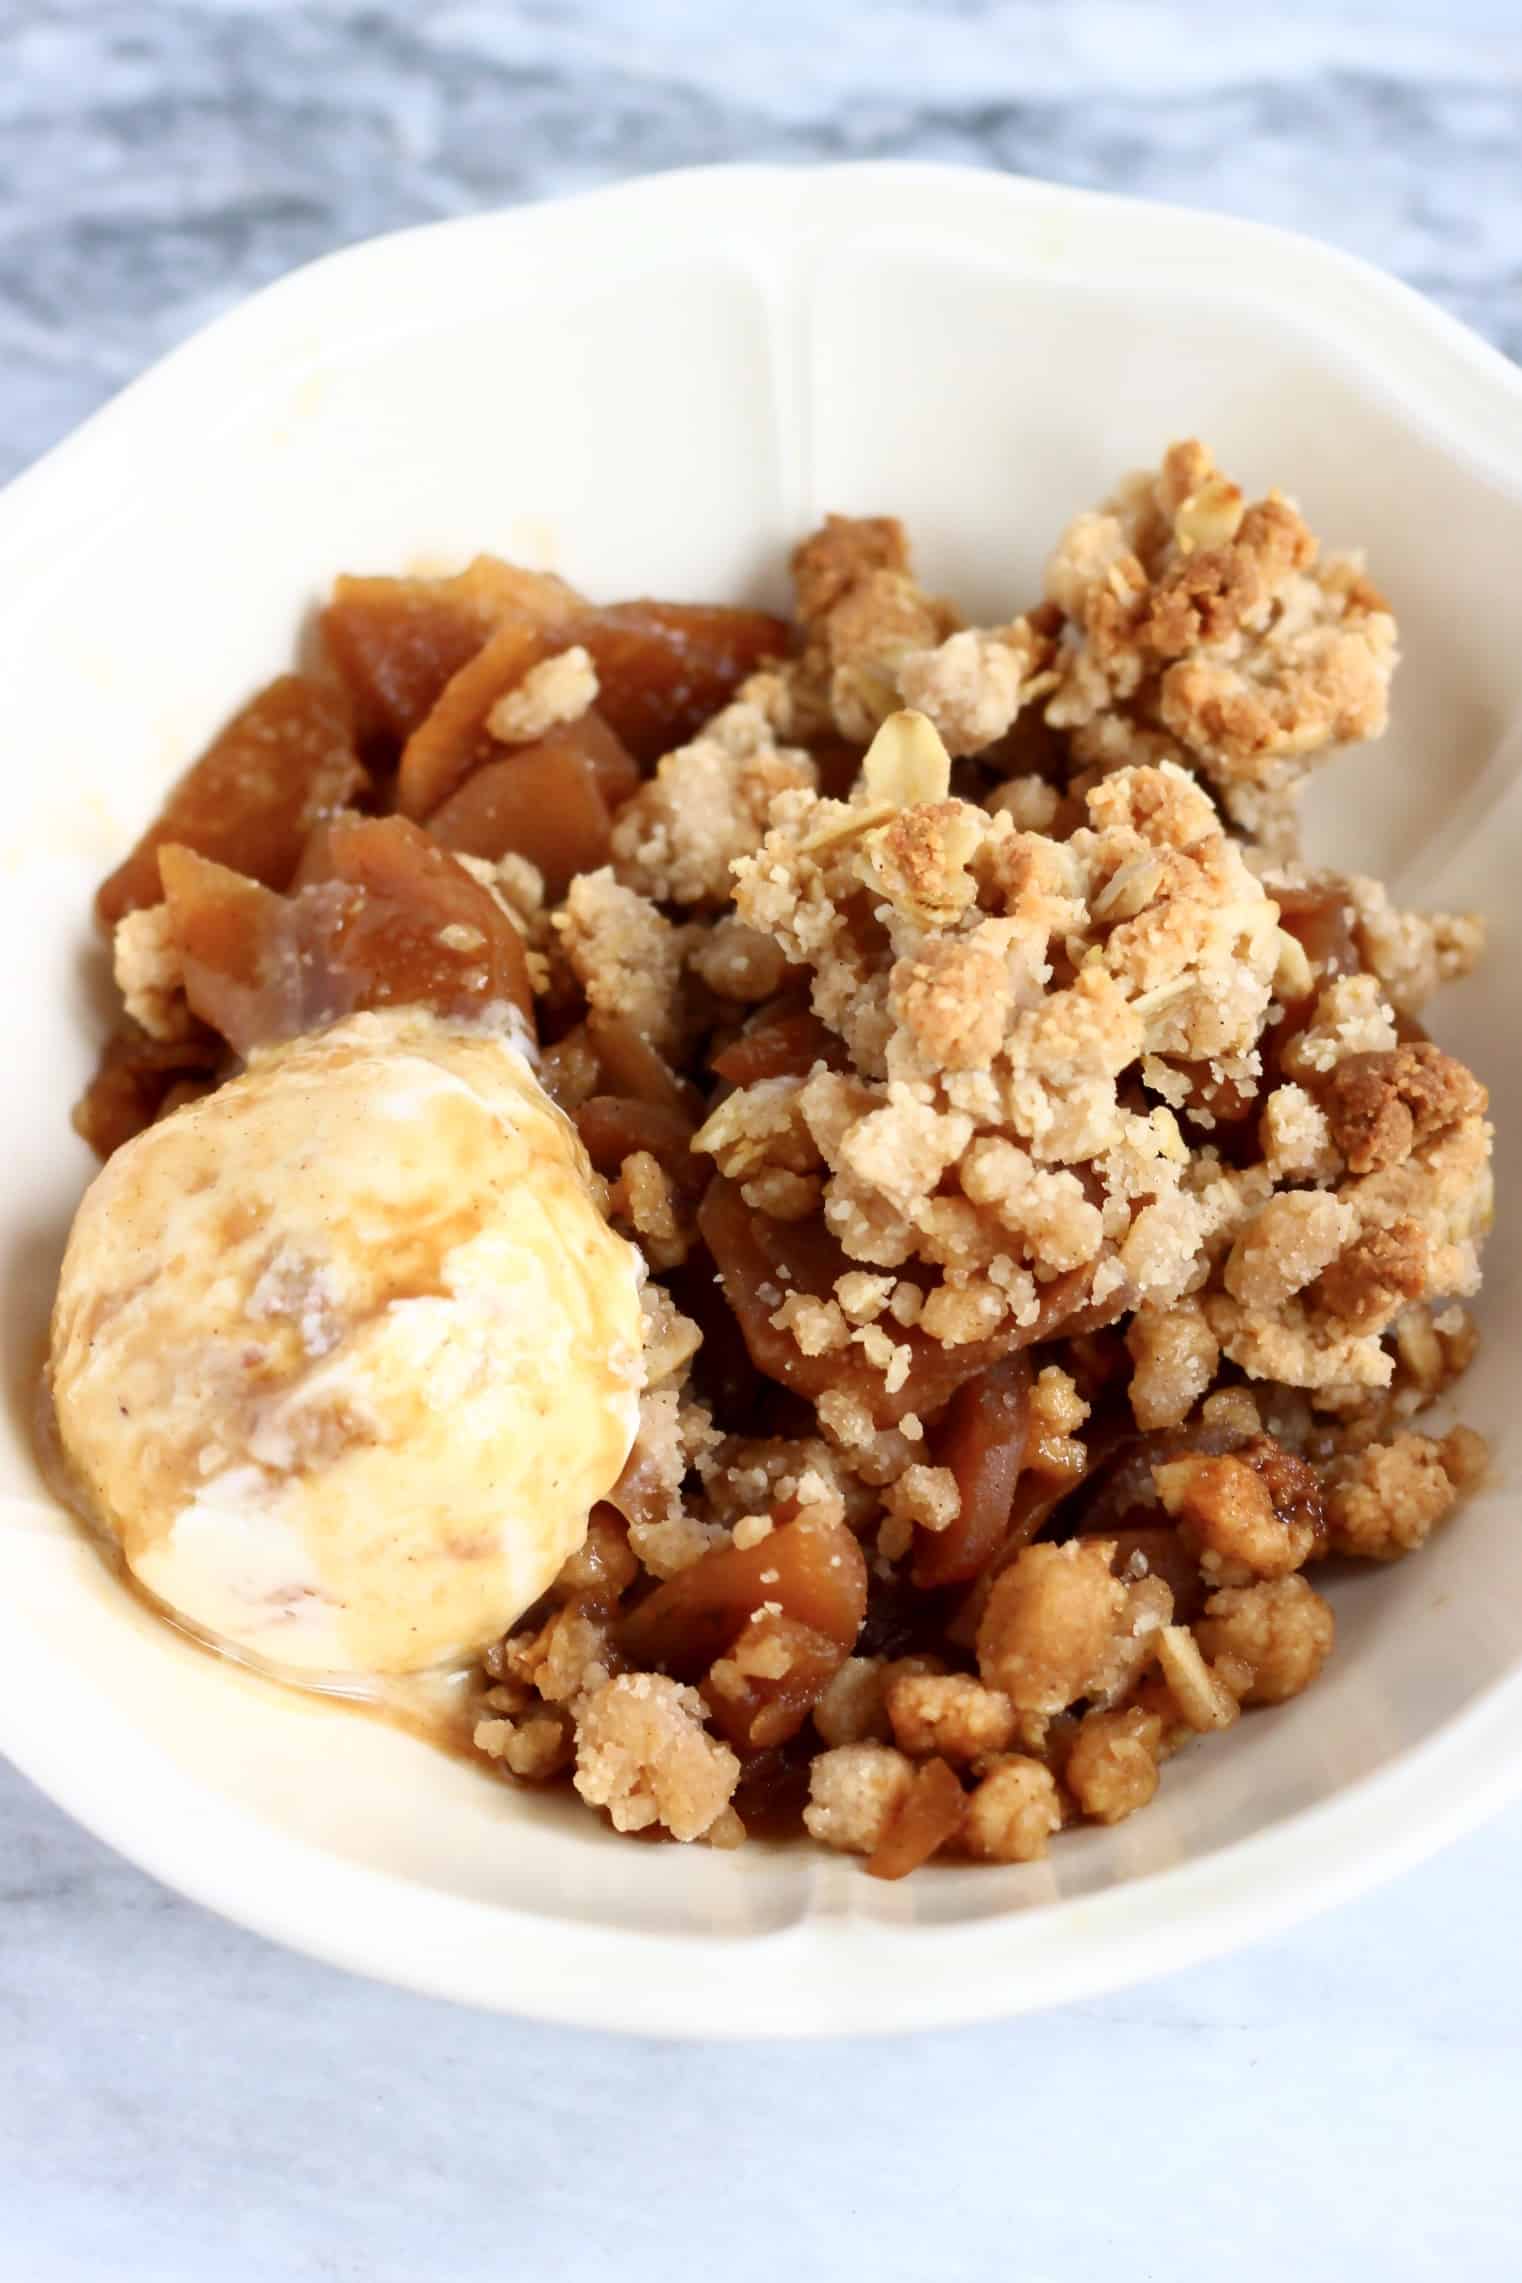 Gluten-free vegan apple crumble with a scoop of ice cream in a bowl